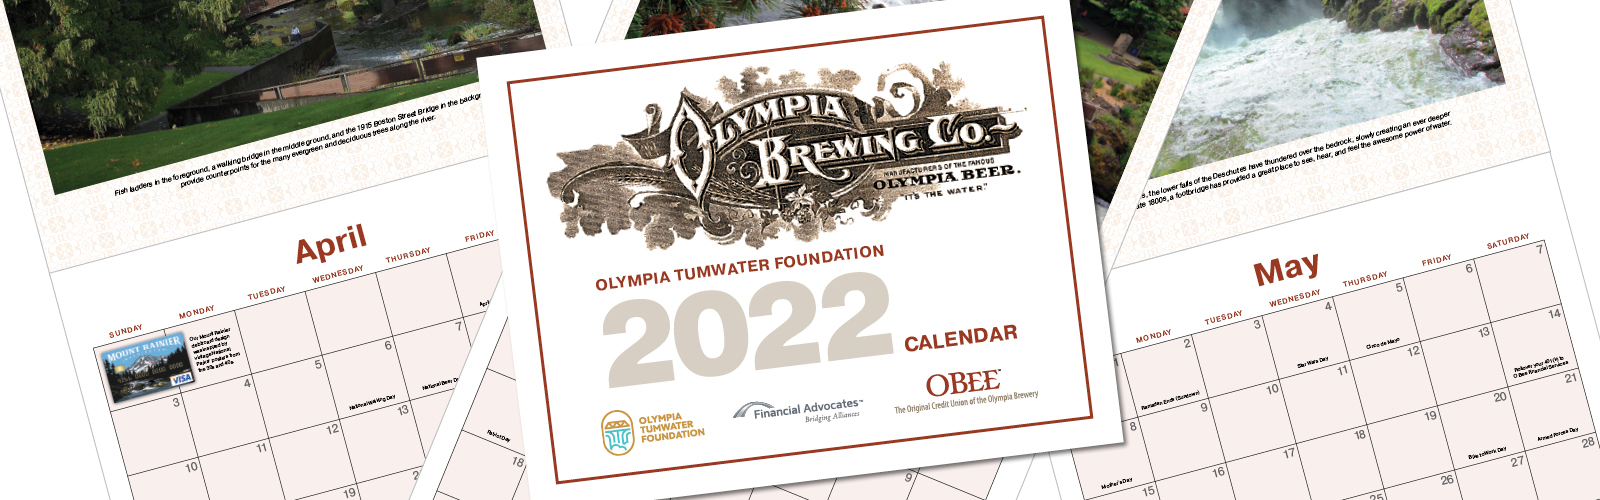 the 2022 Calendar features Brewery Park at Tumwater Falls